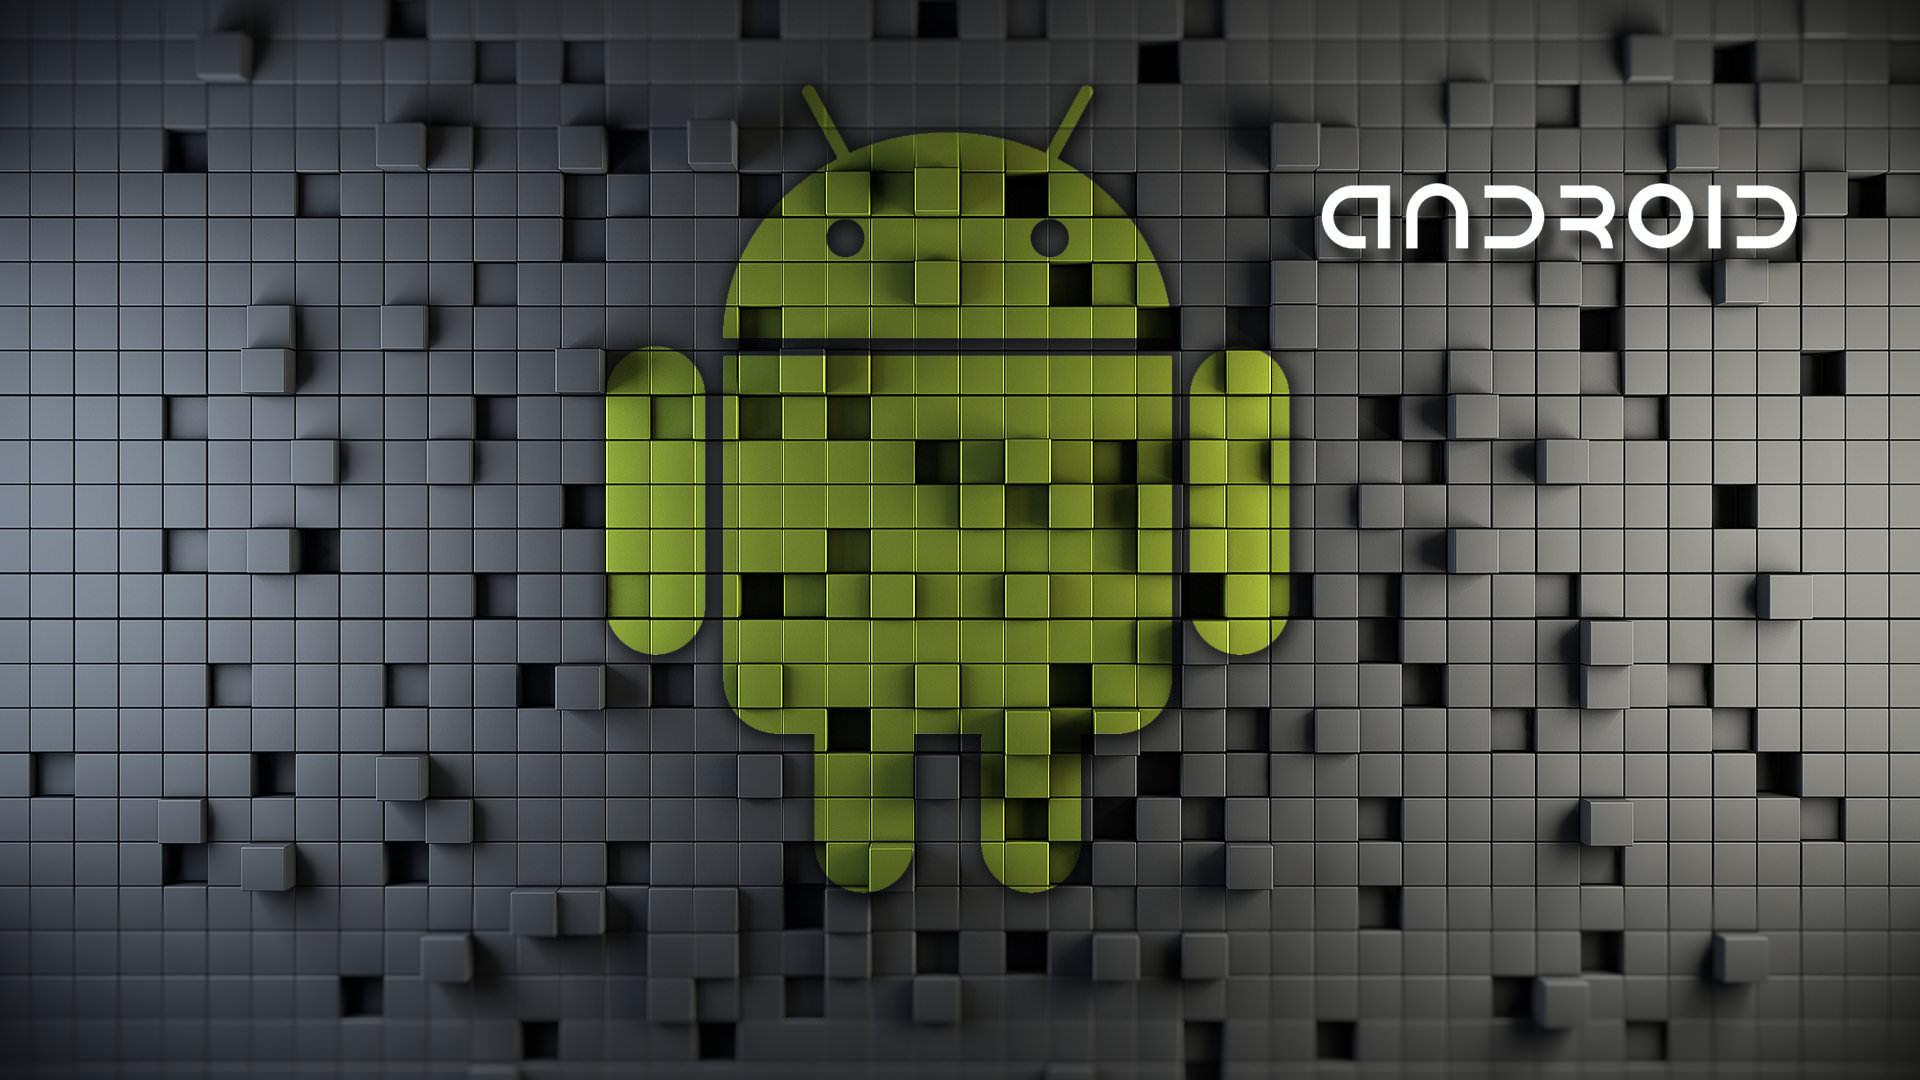 Android wallpaper HD for desktop background